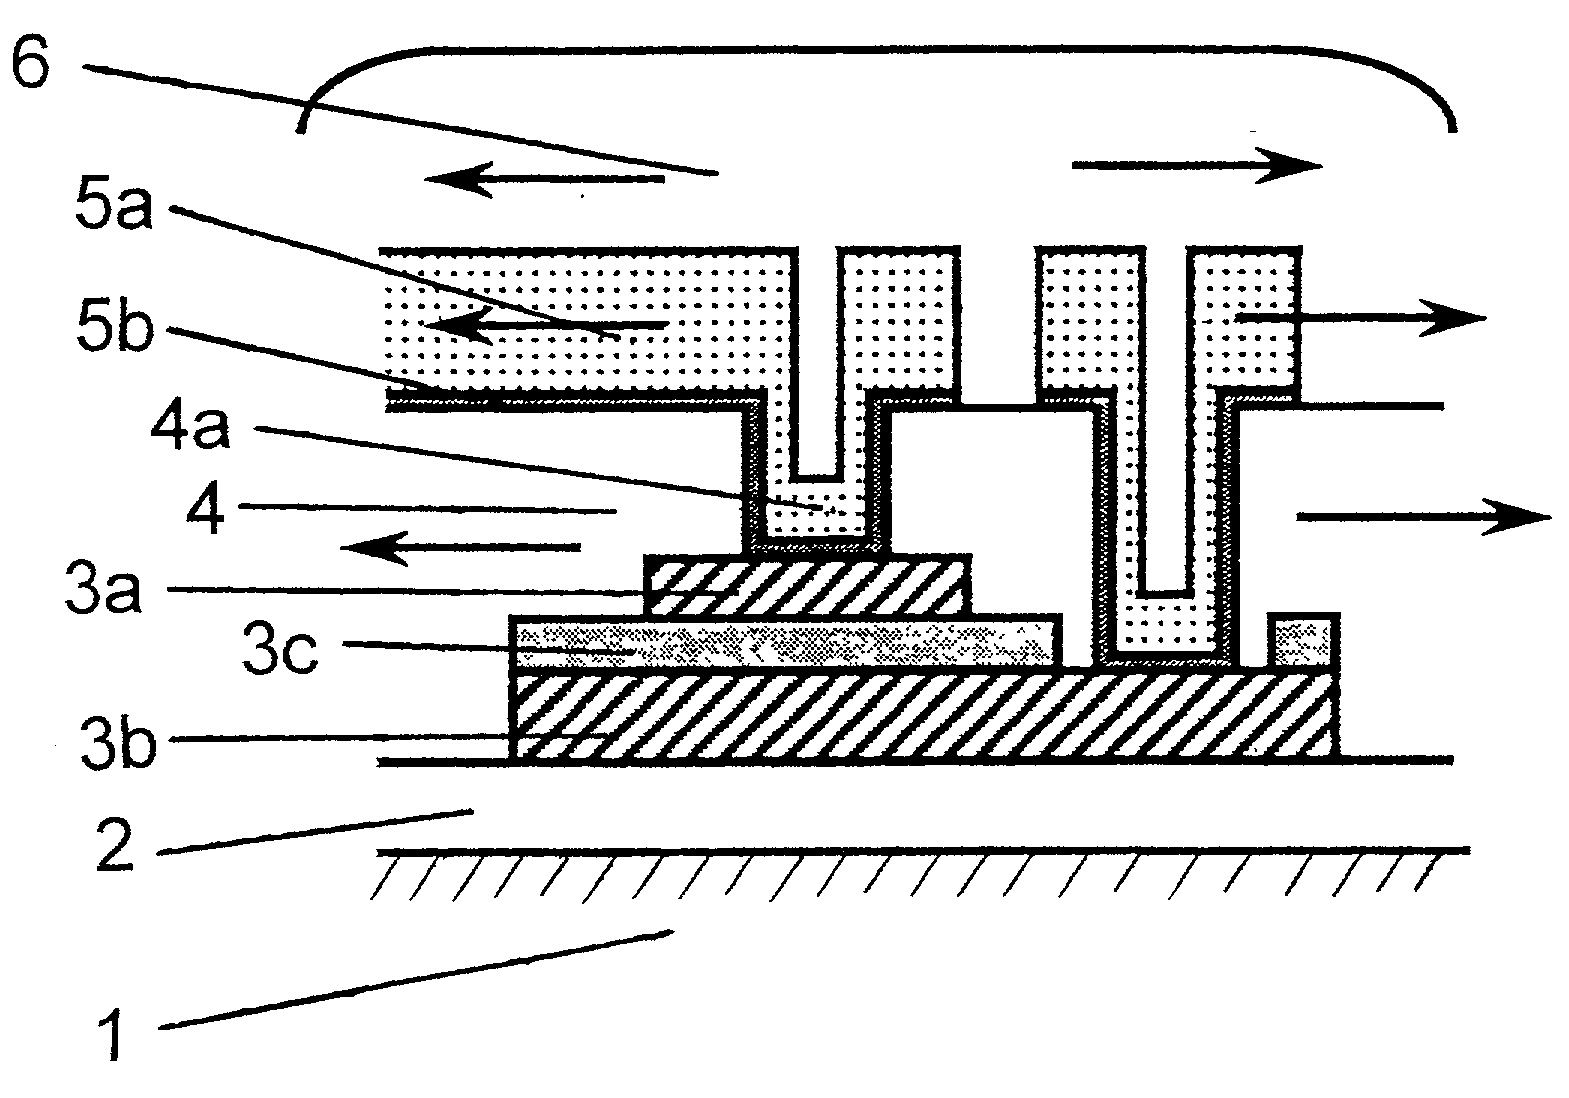 Semiconductor device having a ferroelectric capacitor with tensile stress properties